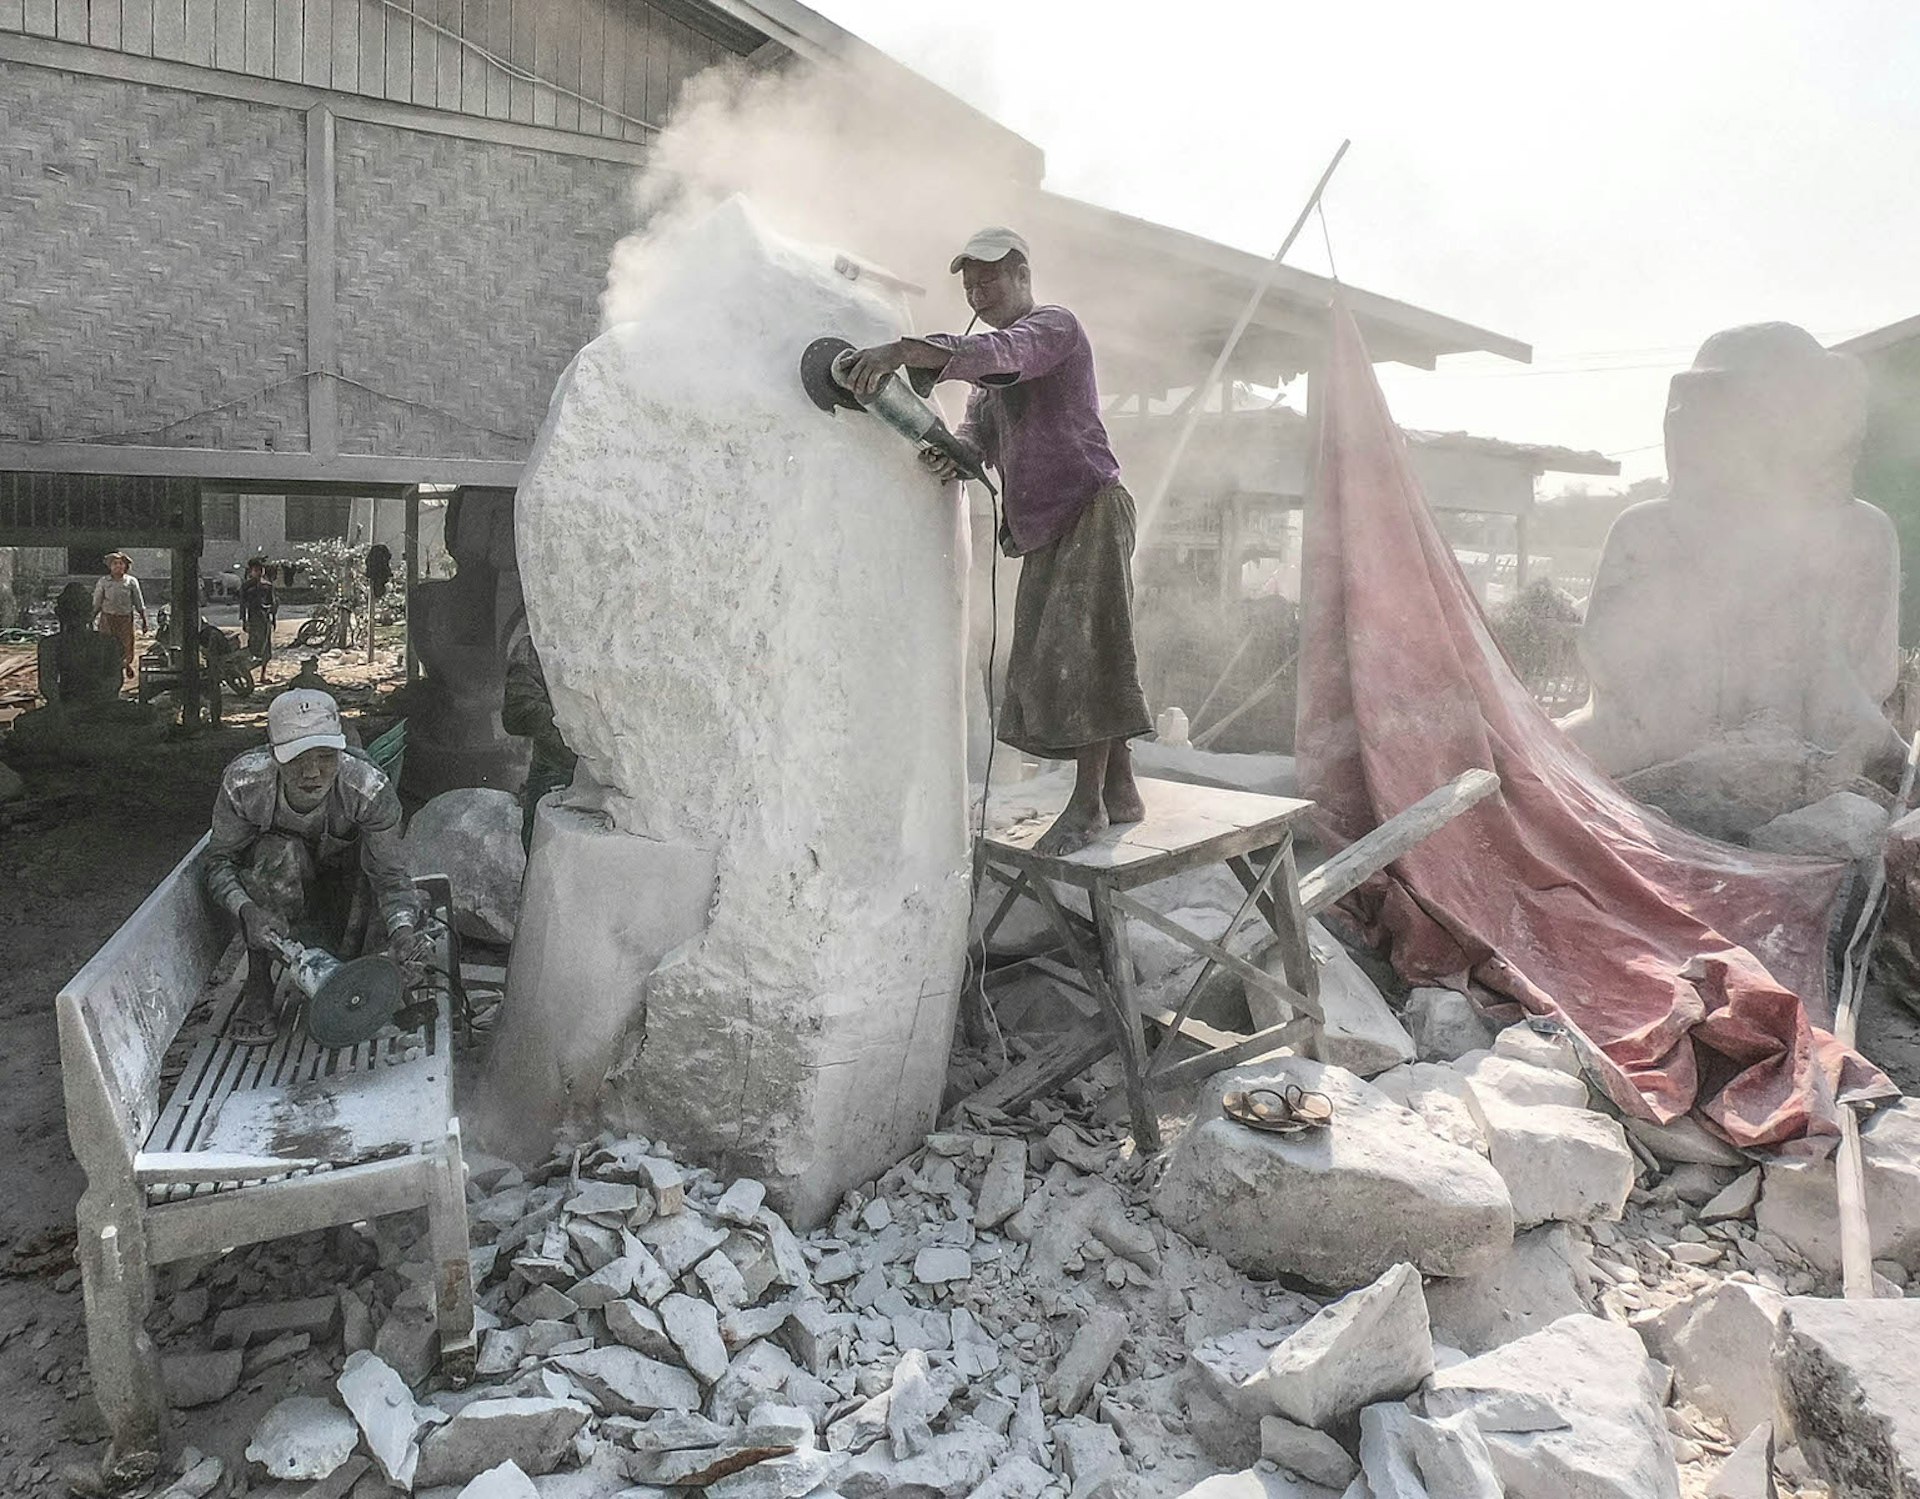 White dust fills the air as workmen sand down a slab of alabaster in Sakyin